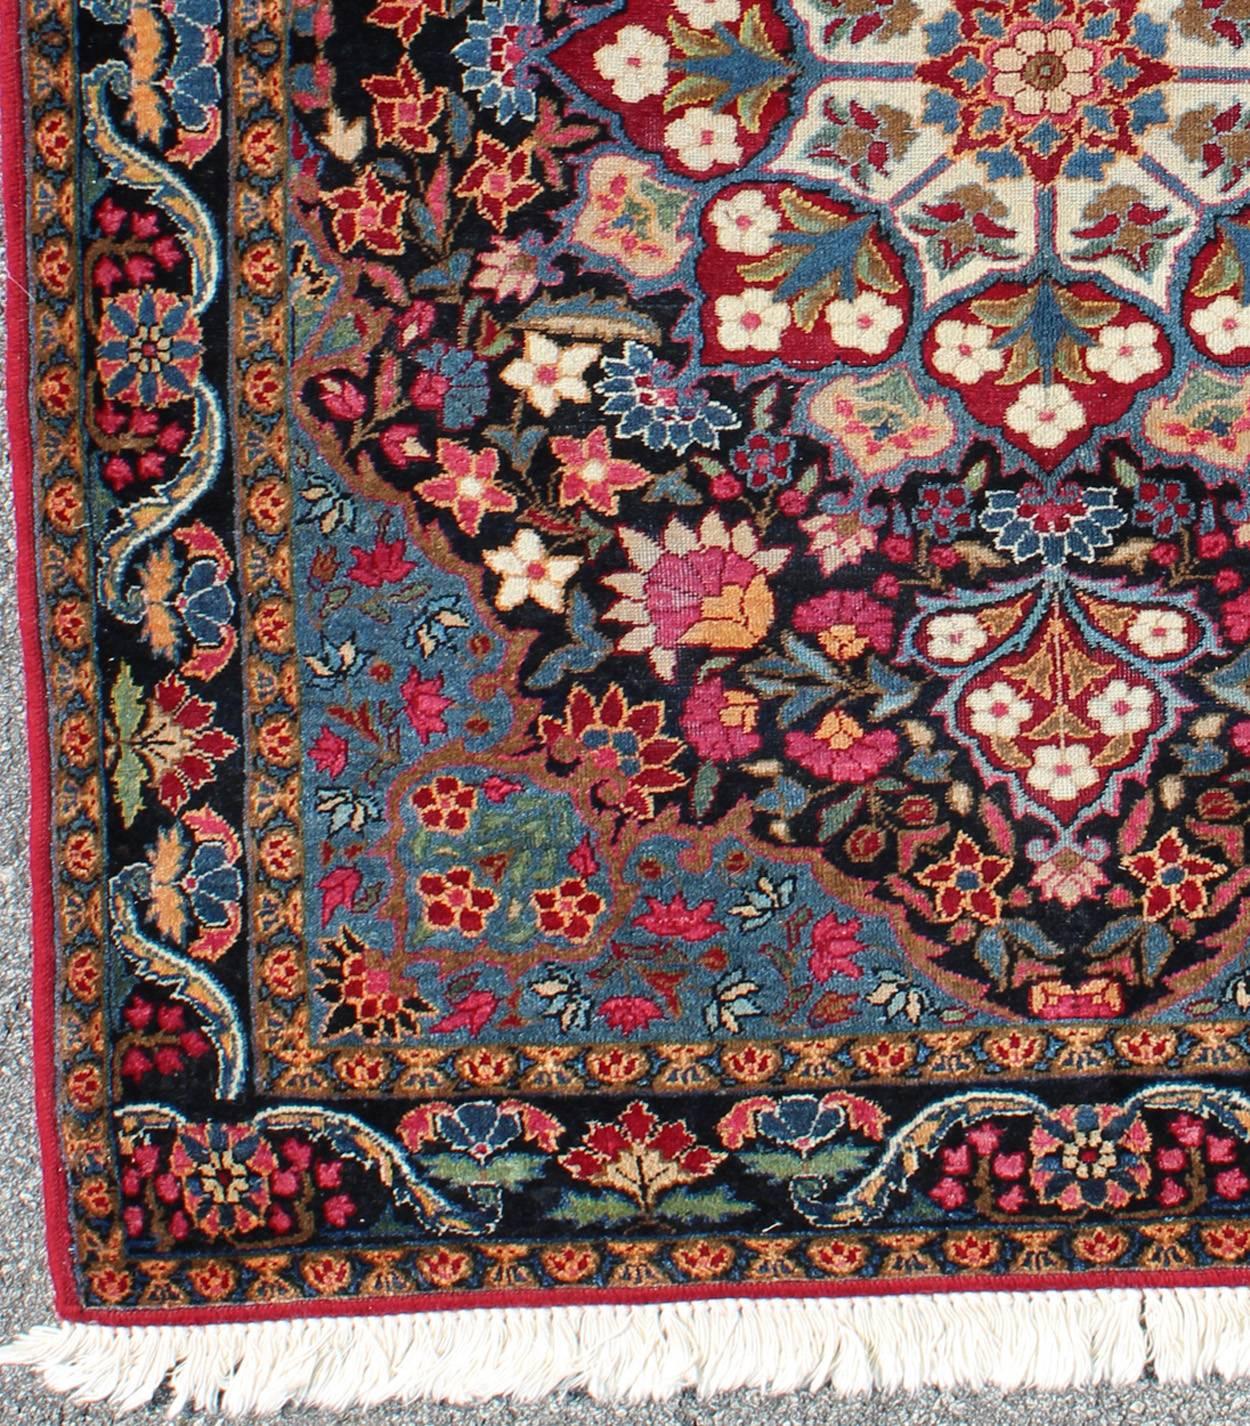 Blooming Floral Medallion vintage Persian Kerman rug with multi-colors, rug emac-004, country of origin / type: Iran / Kerman, circa 1940s

This vintage Persian Kerman rug, circa 1960 from the mid-20th century, features a light blue corners, which